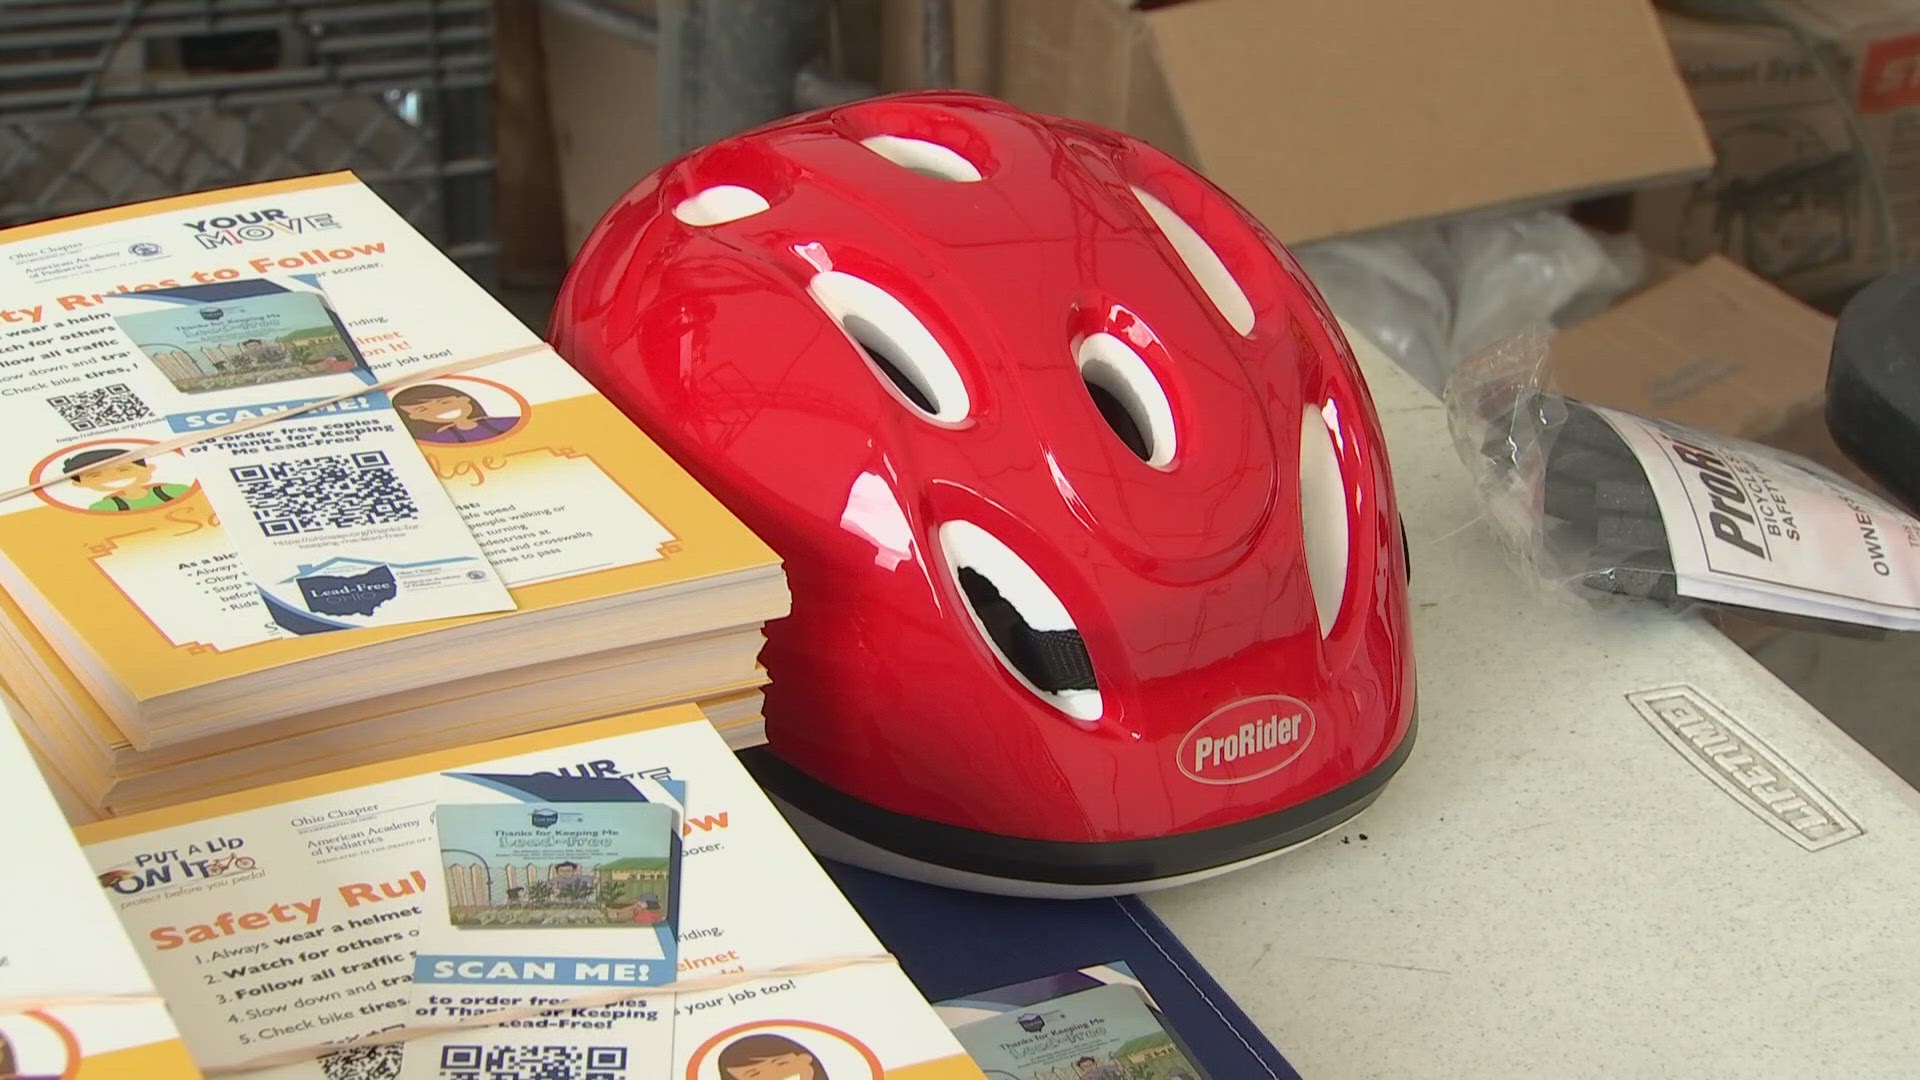 Since the program's launch in 2011, more than 100,000 free helmets have gone to Ohio children.